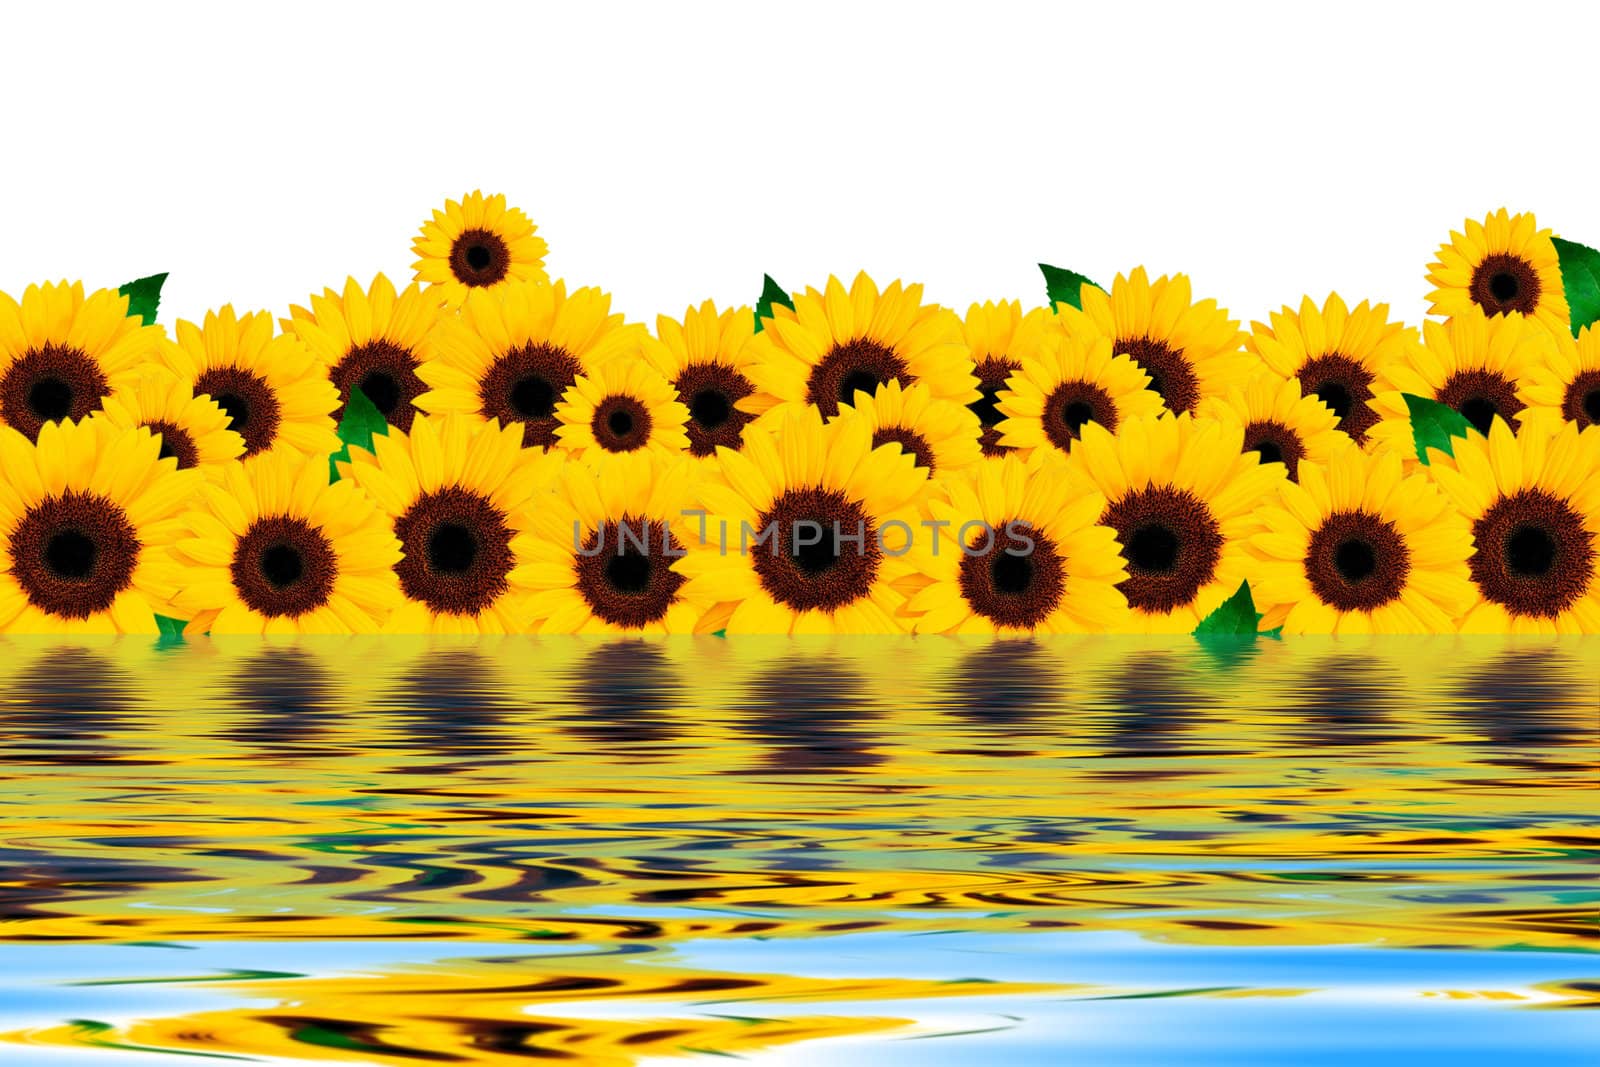 Water and sunflower by petrkurgan